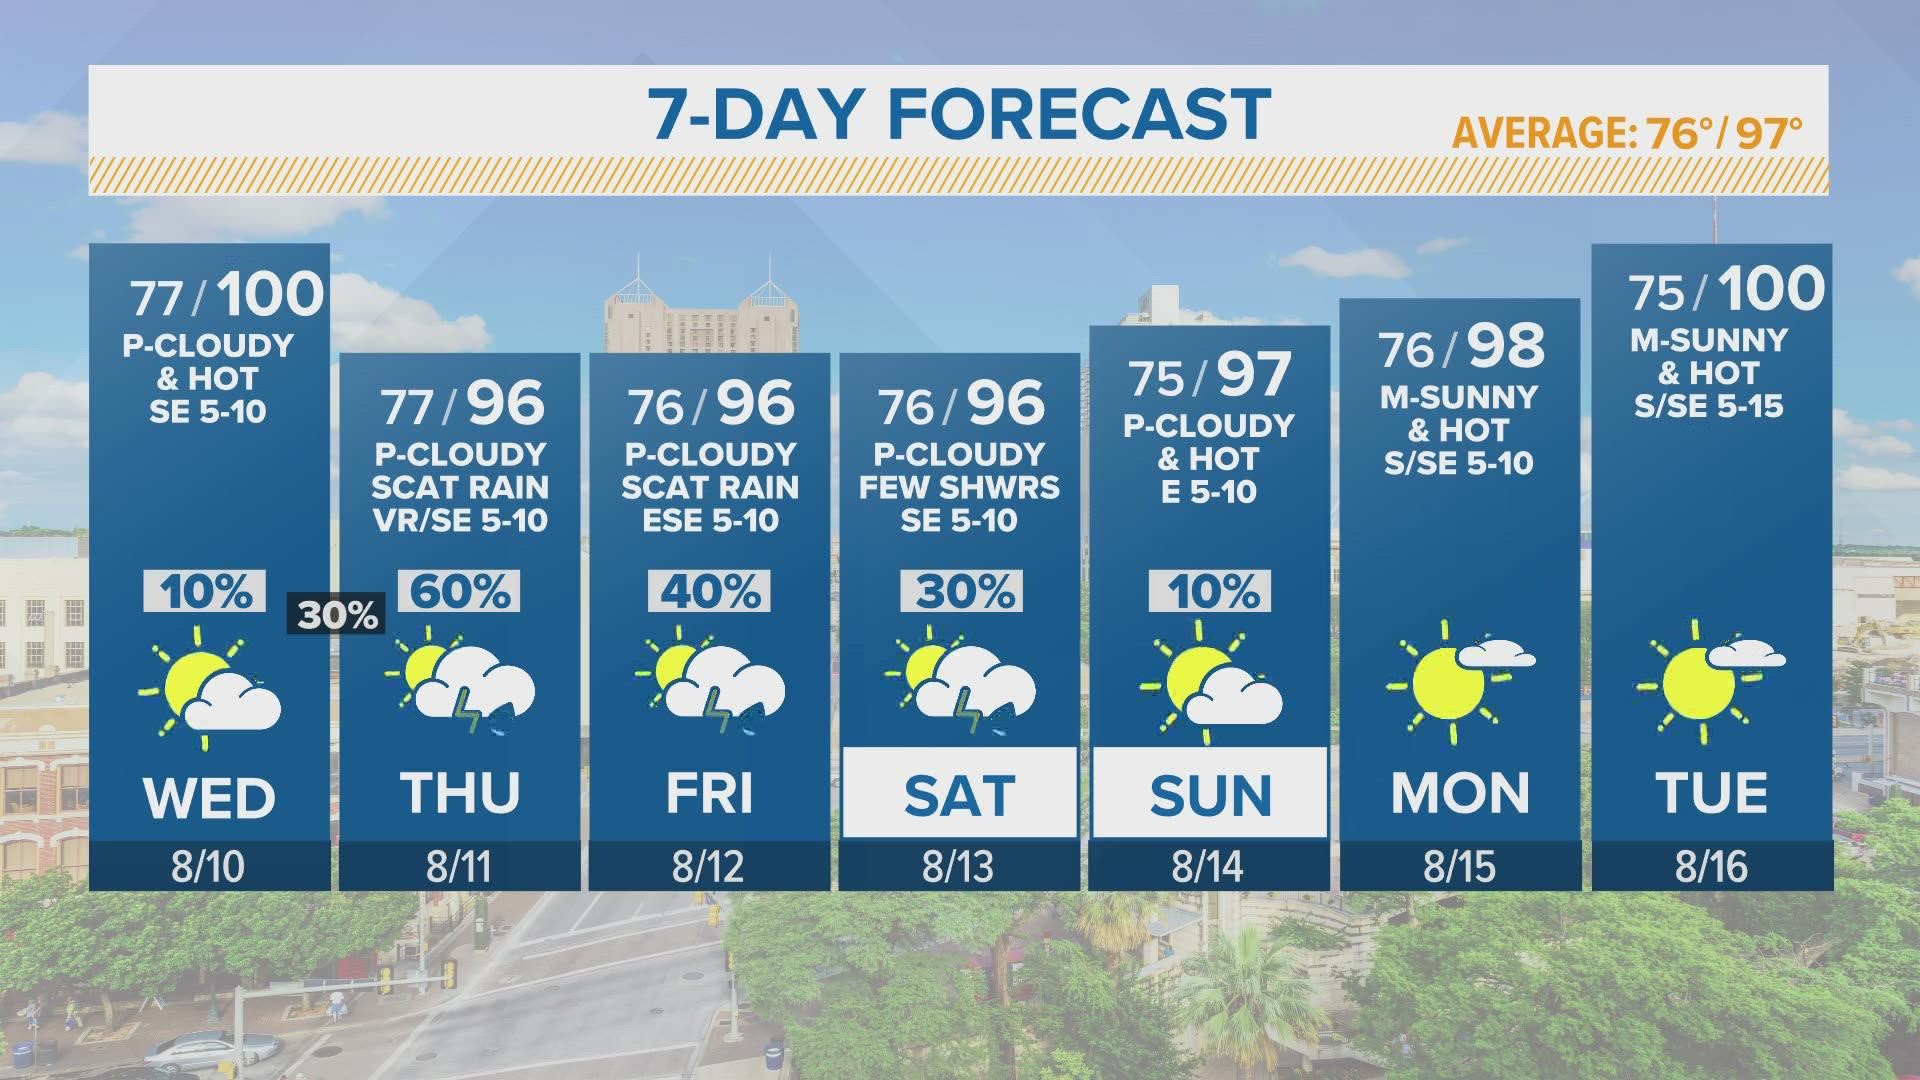 There is a pretty good chance that we will see some rain in San Antonio on Friday, finally!